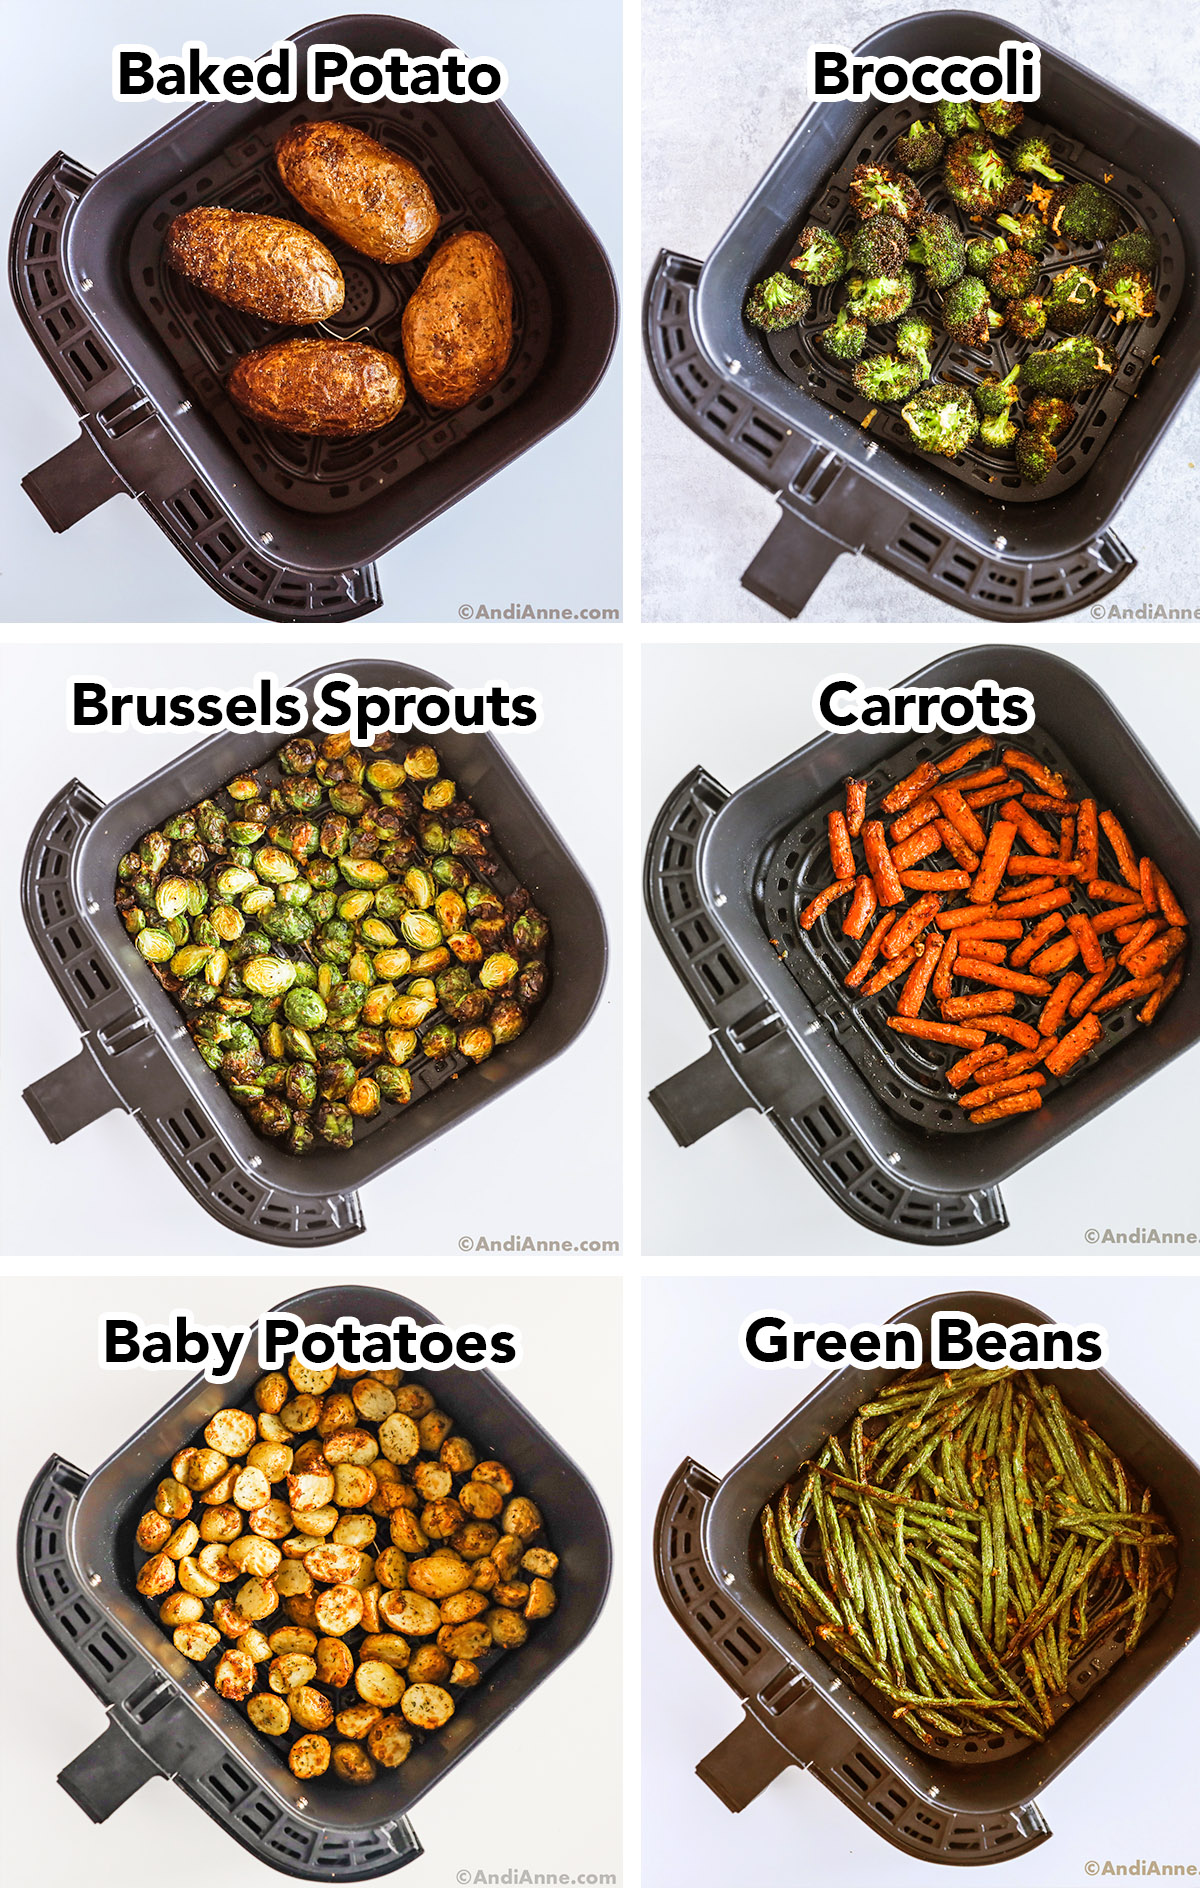 6 air fryer basket pictures with different vegetables inside including baked potato, broccoli, brussels sprouts, carrots, baby potatoes and green beans.